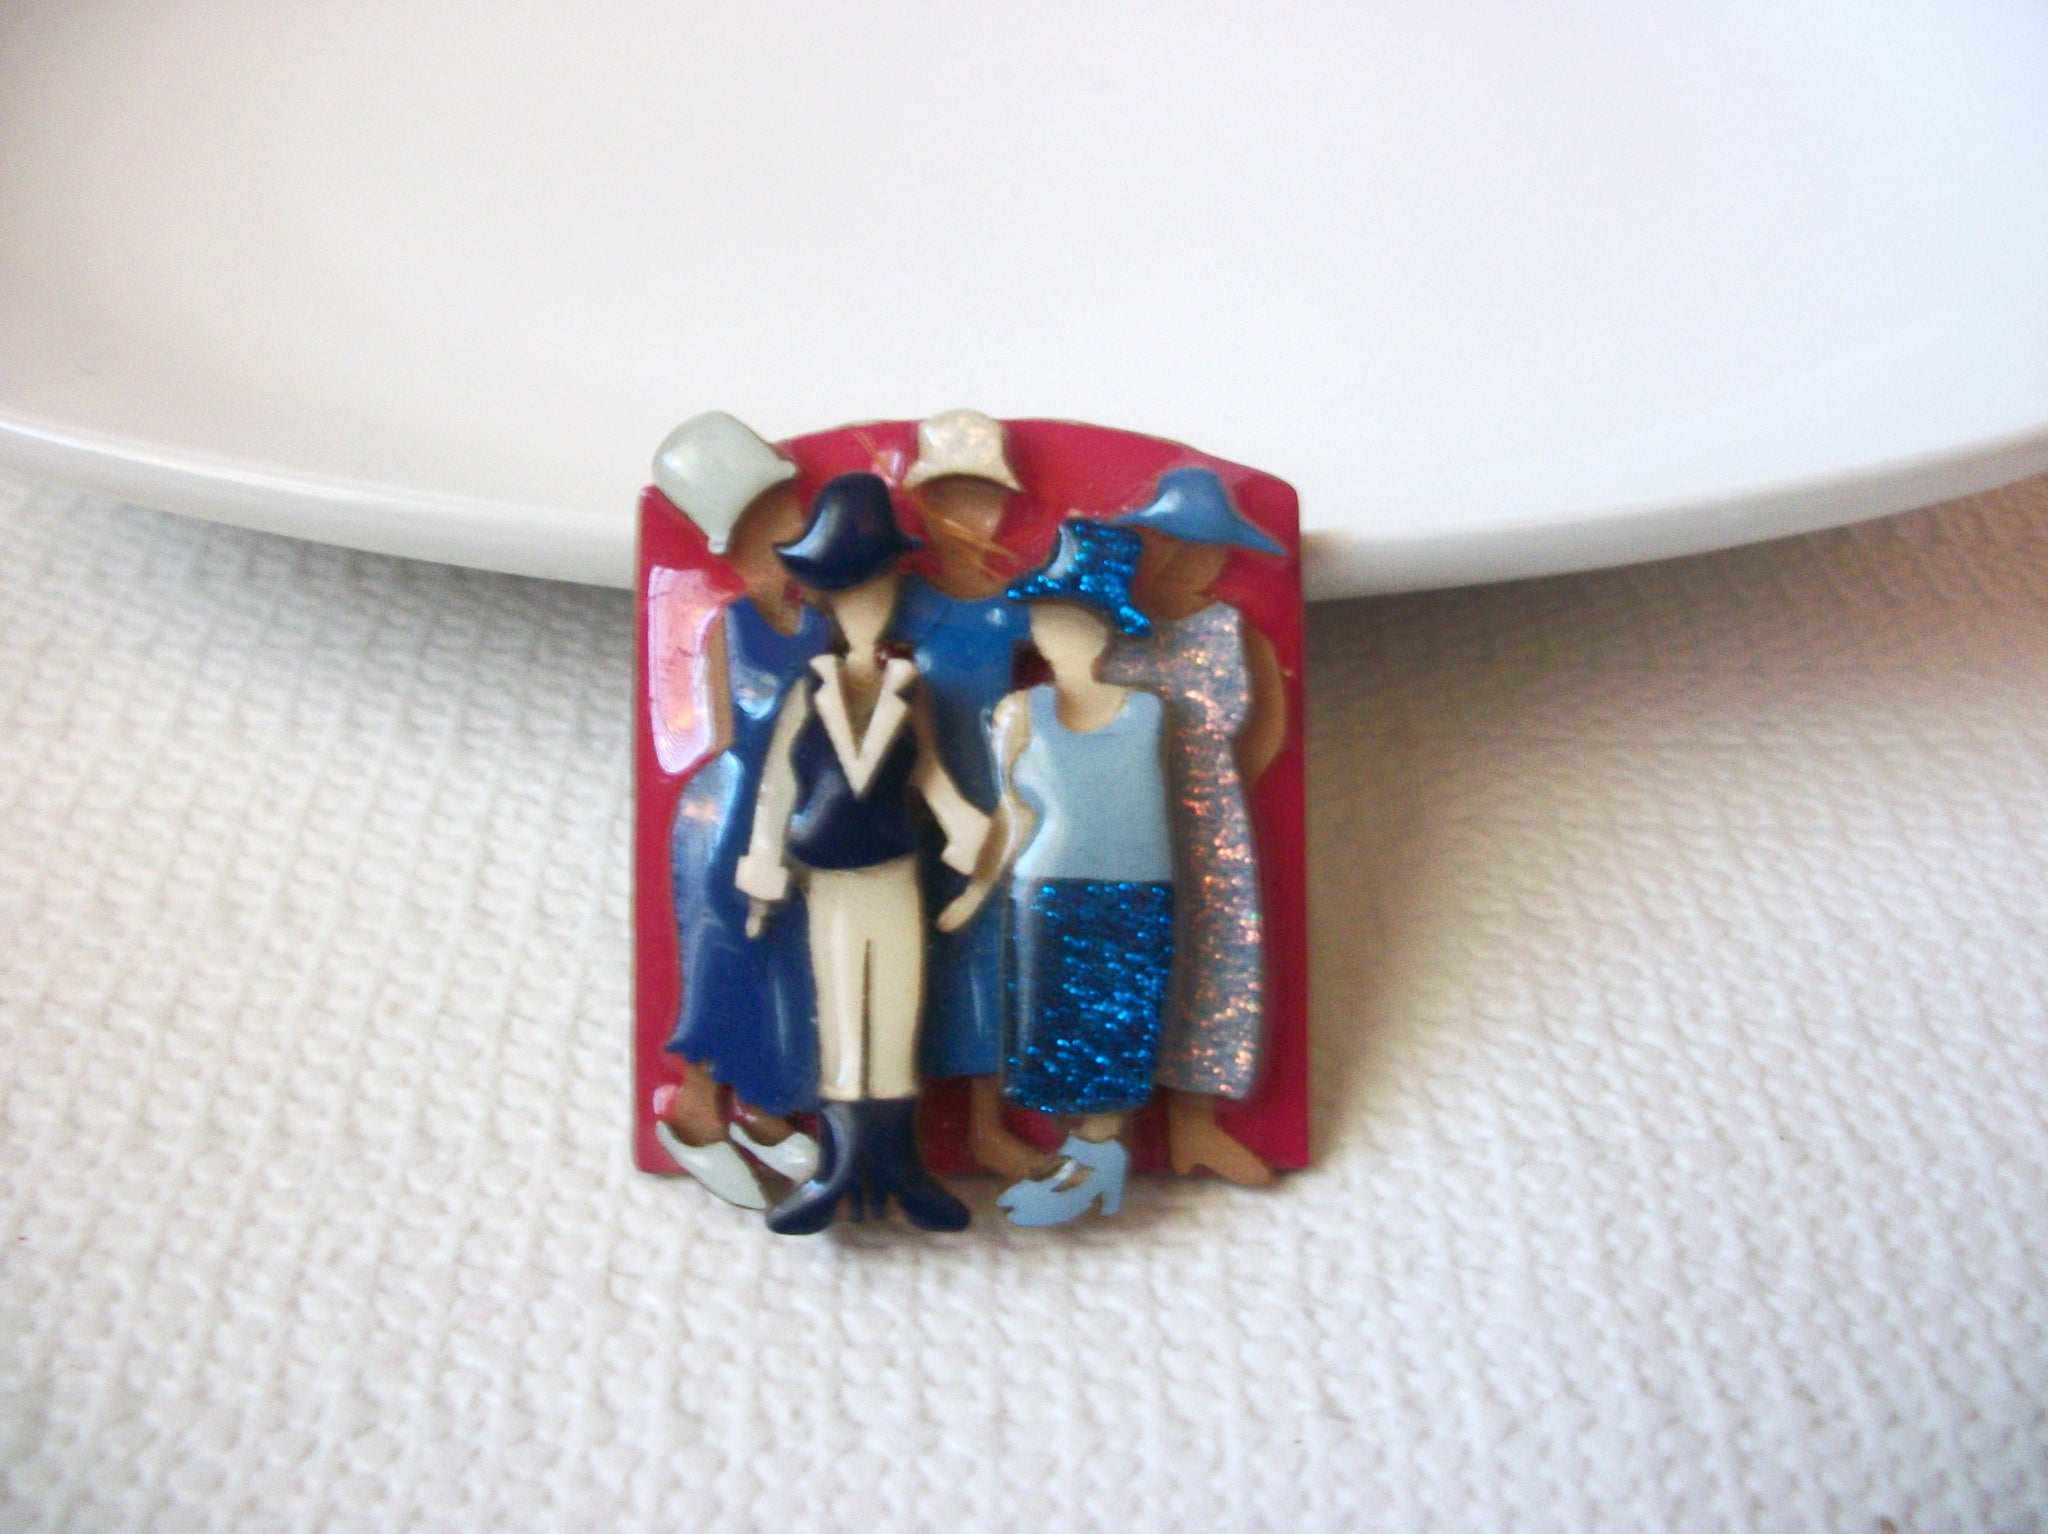 Woman Pins By Lucinda, July 4th Brooch, Pins By Lucinda 112216